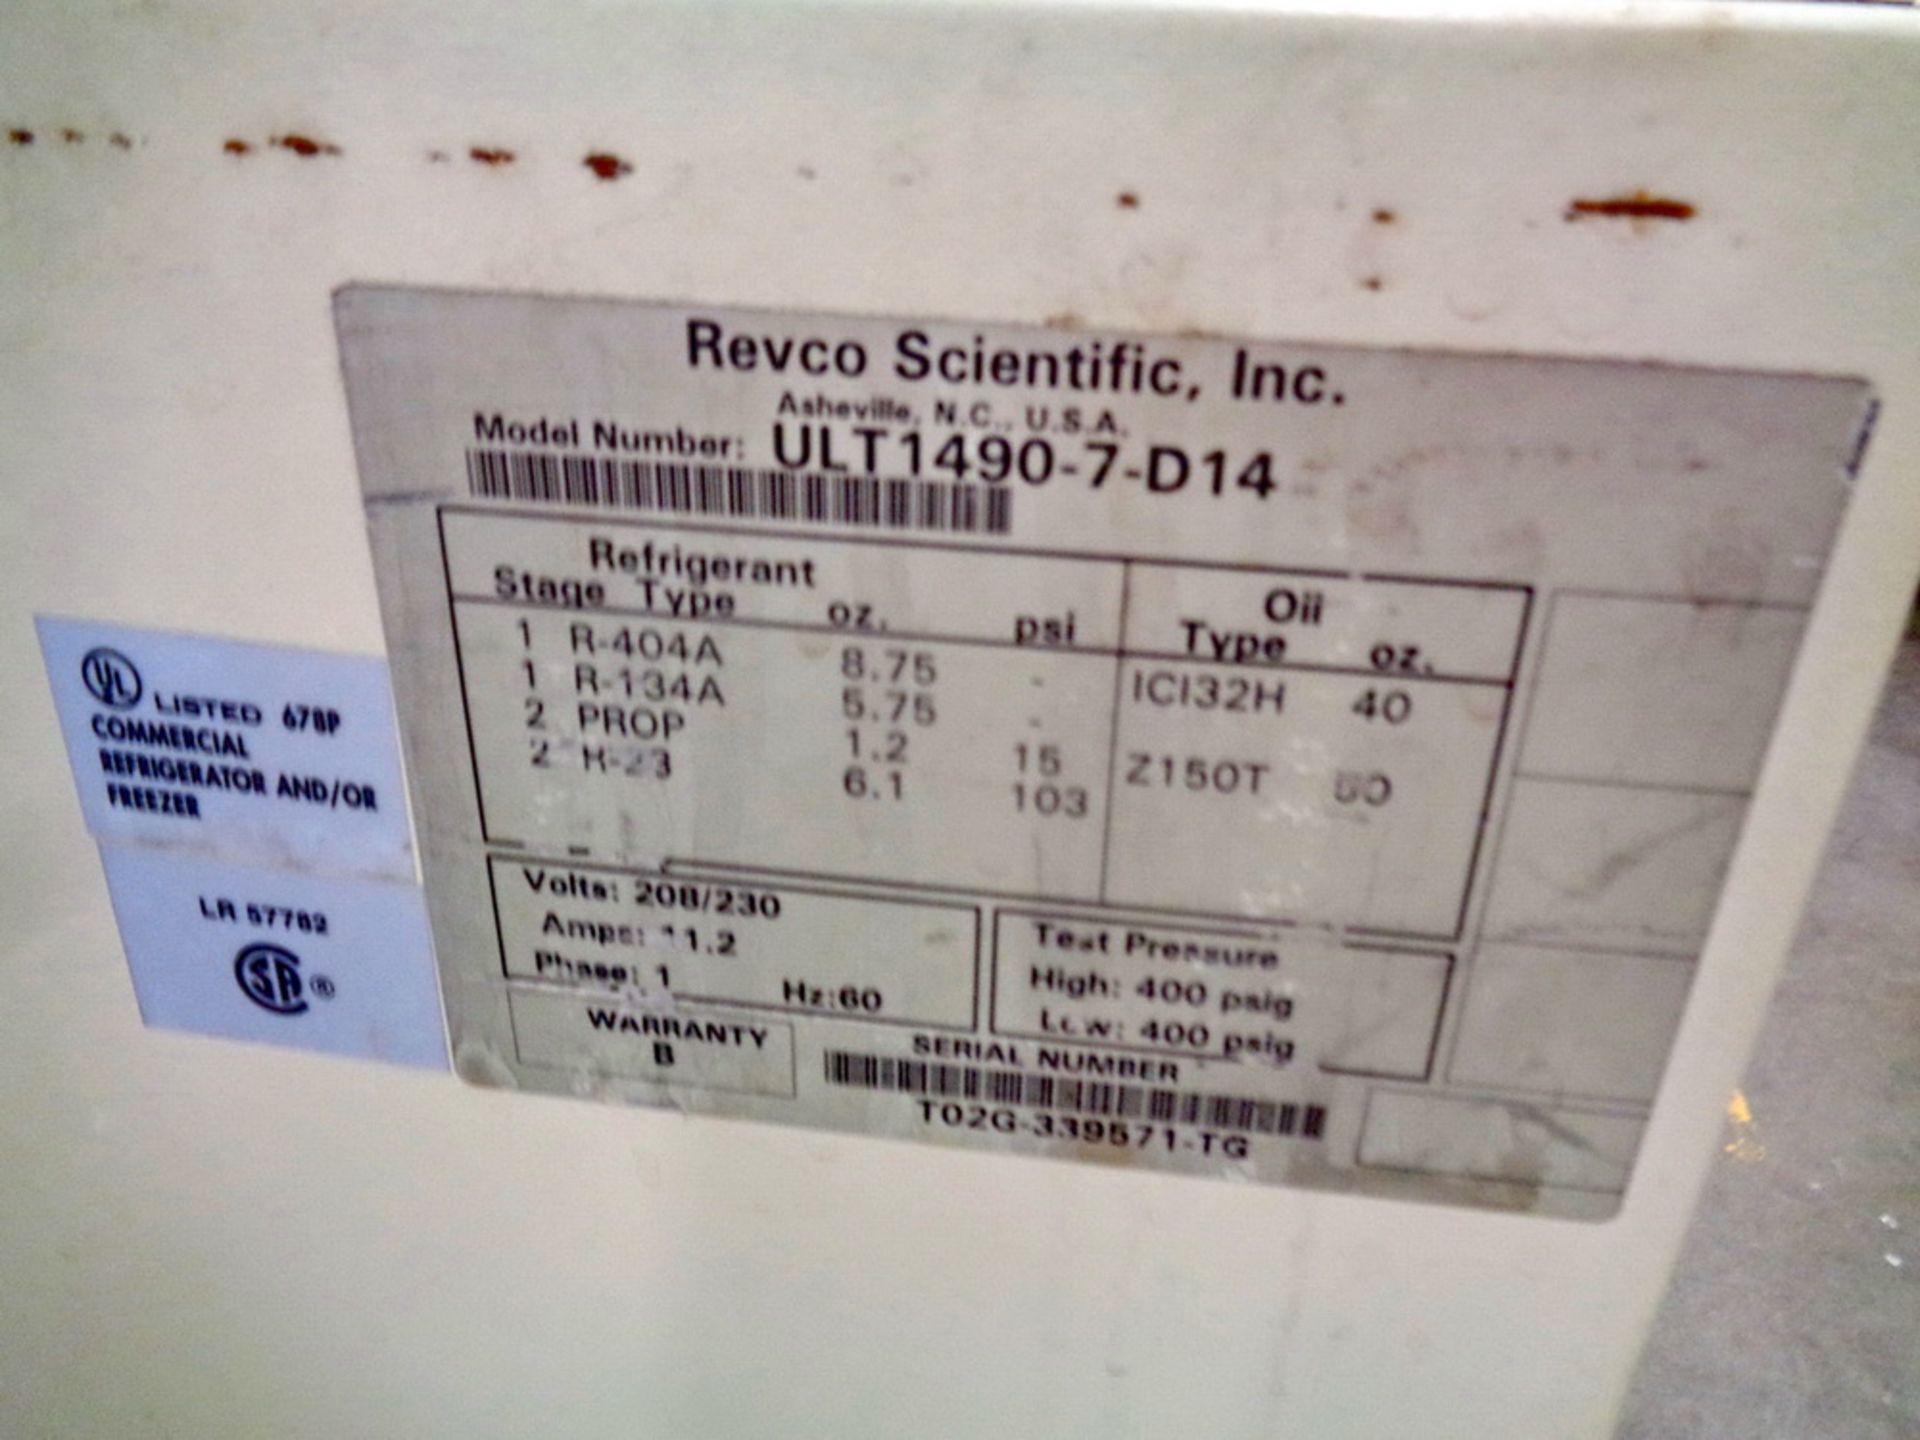 Revco Chest Type Cryofreezer, Model ULT1490-7-D14, S/N T02G-339571-TG - Image 4 of 5